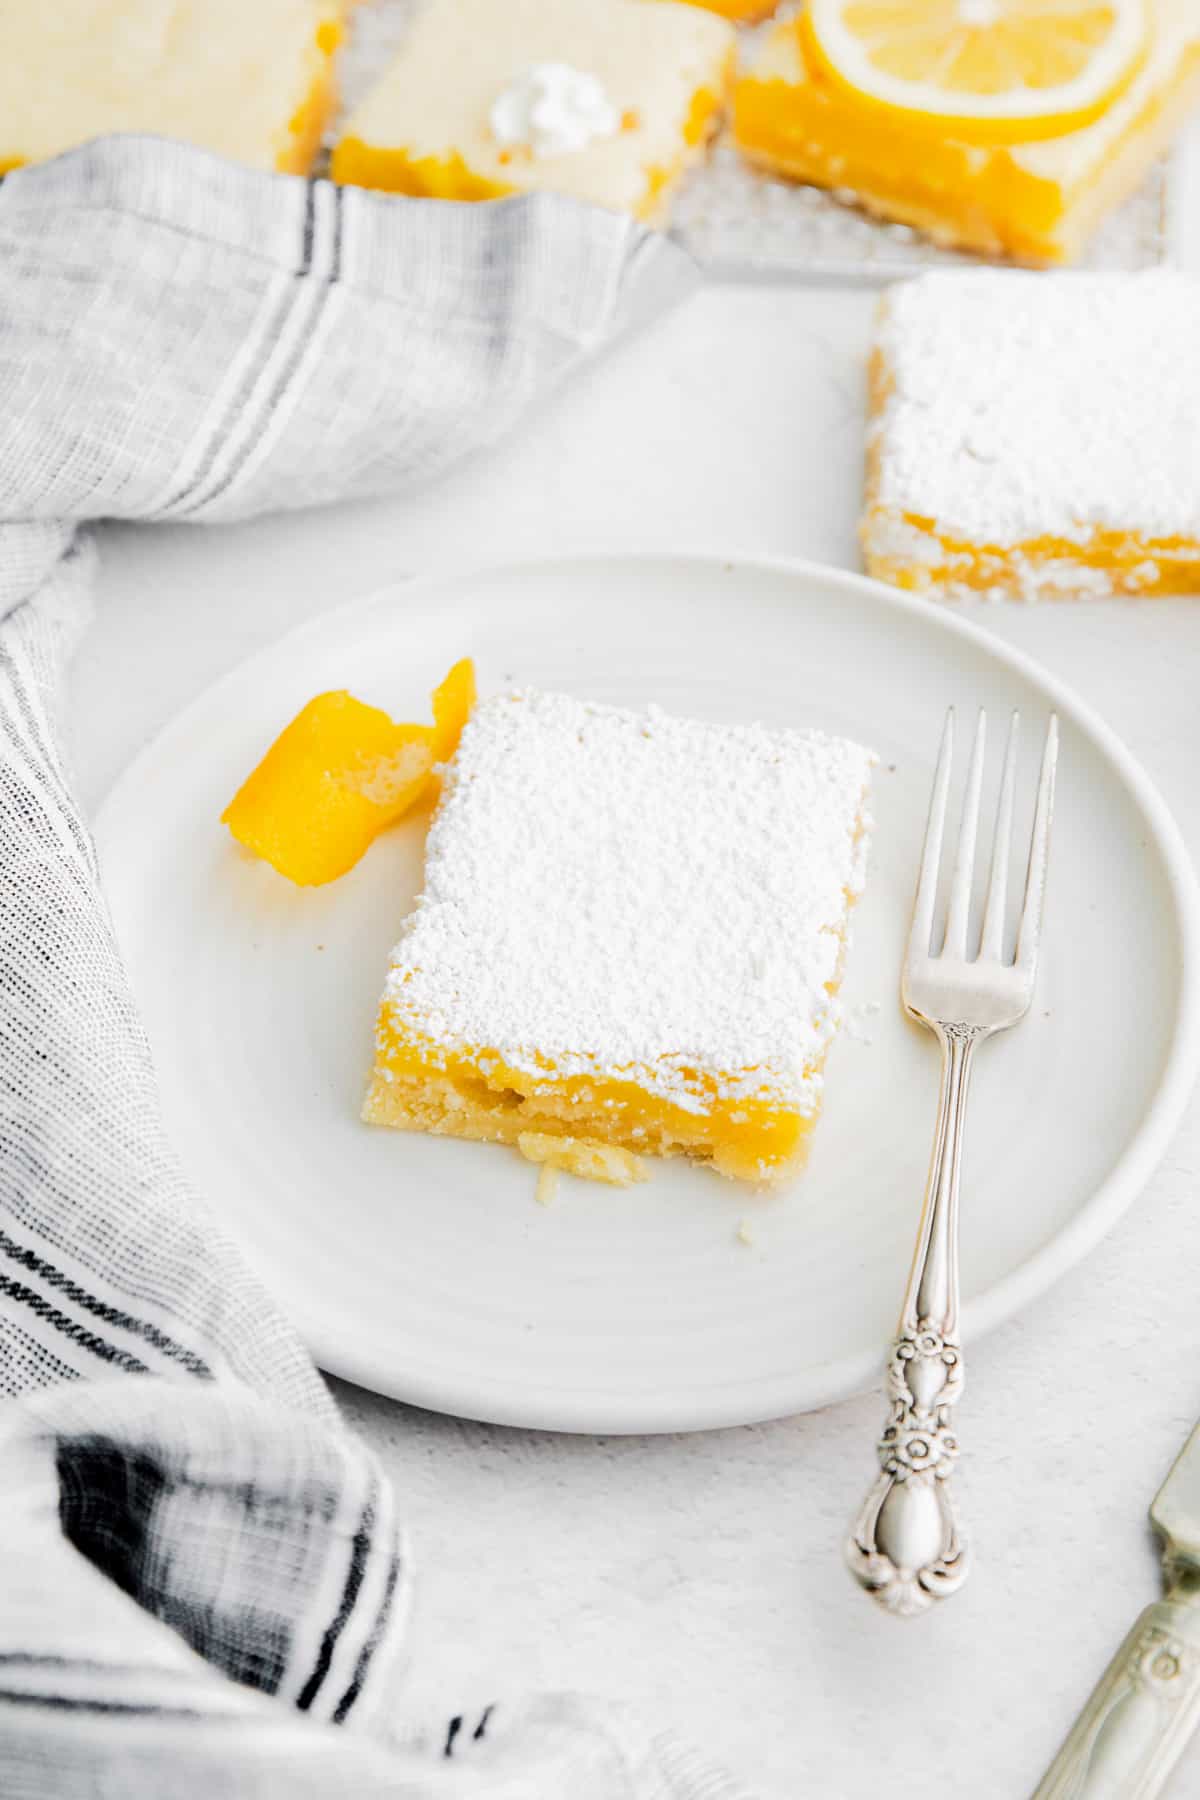 Lemon bar topped with powdered sugar on a white plate with a silver fork and garnish of lemon peel.